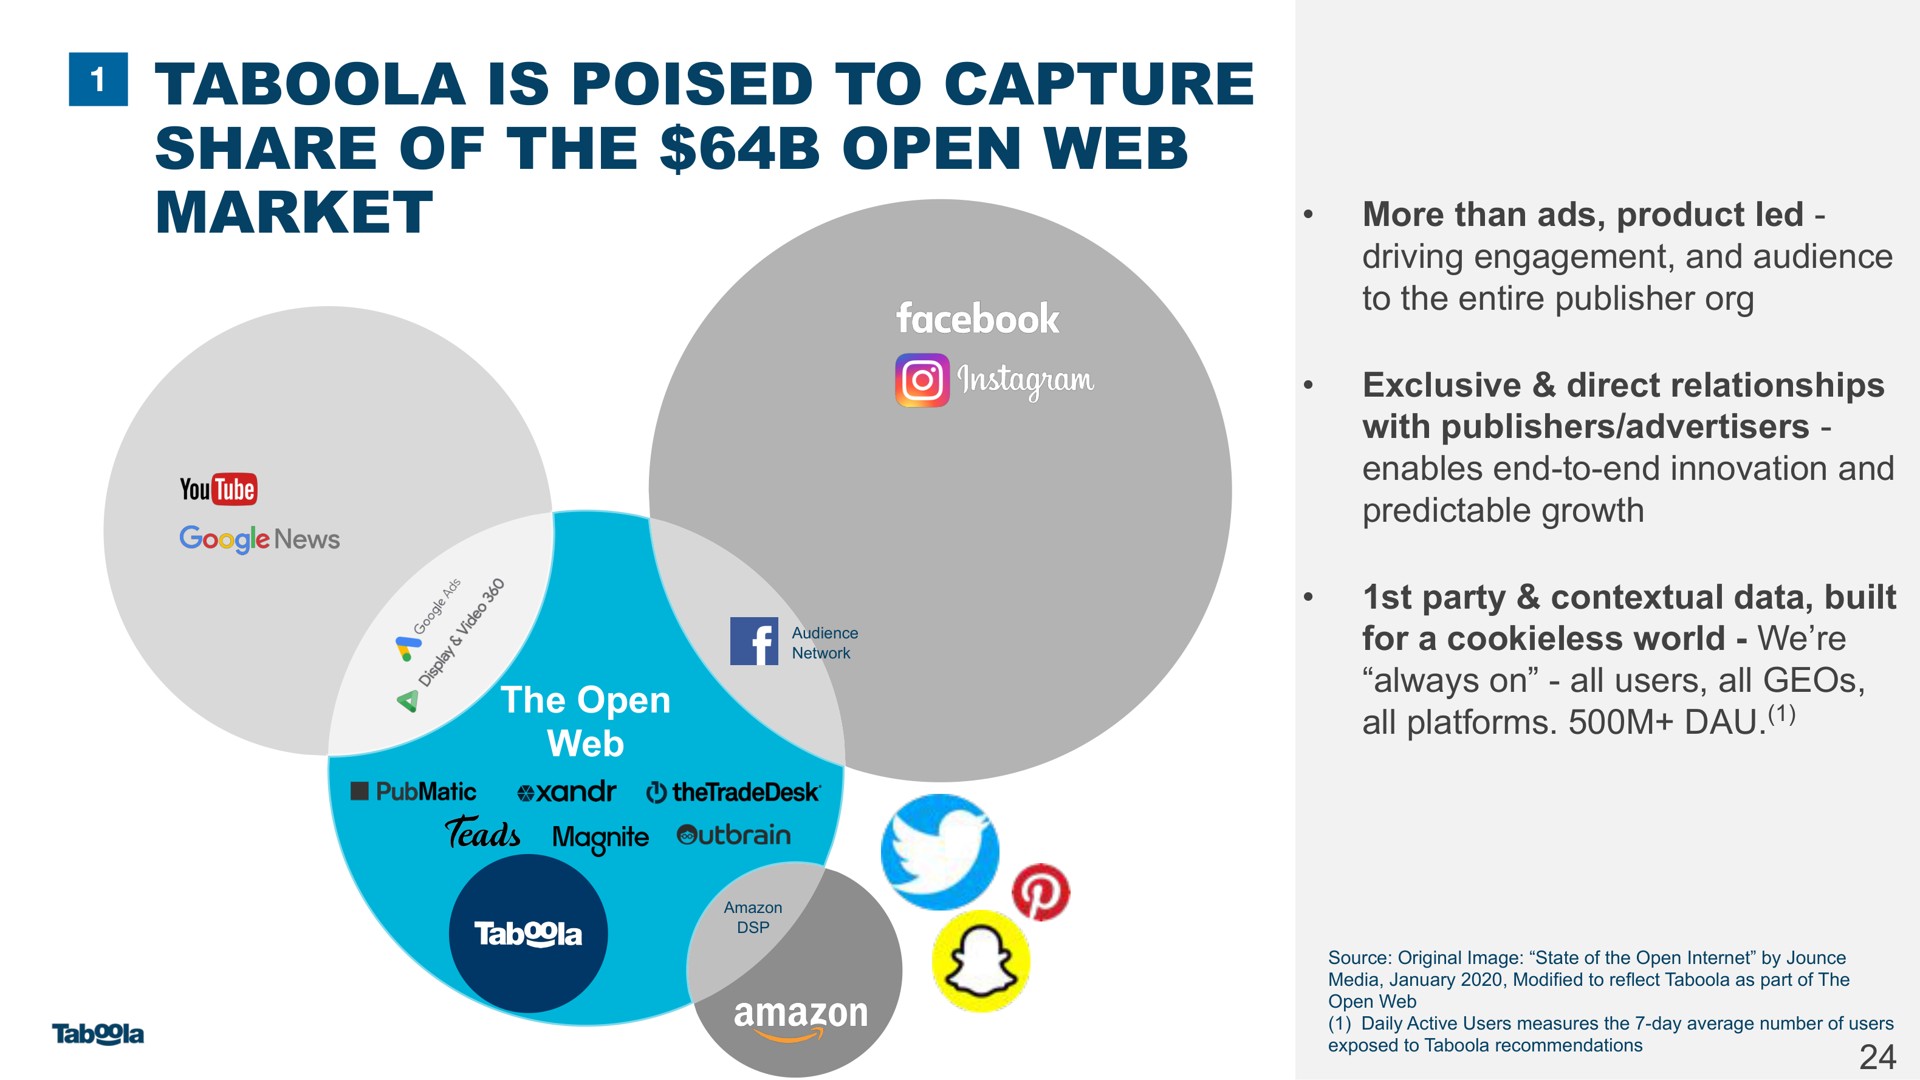 is poised to capture share of the open web market | Taboola